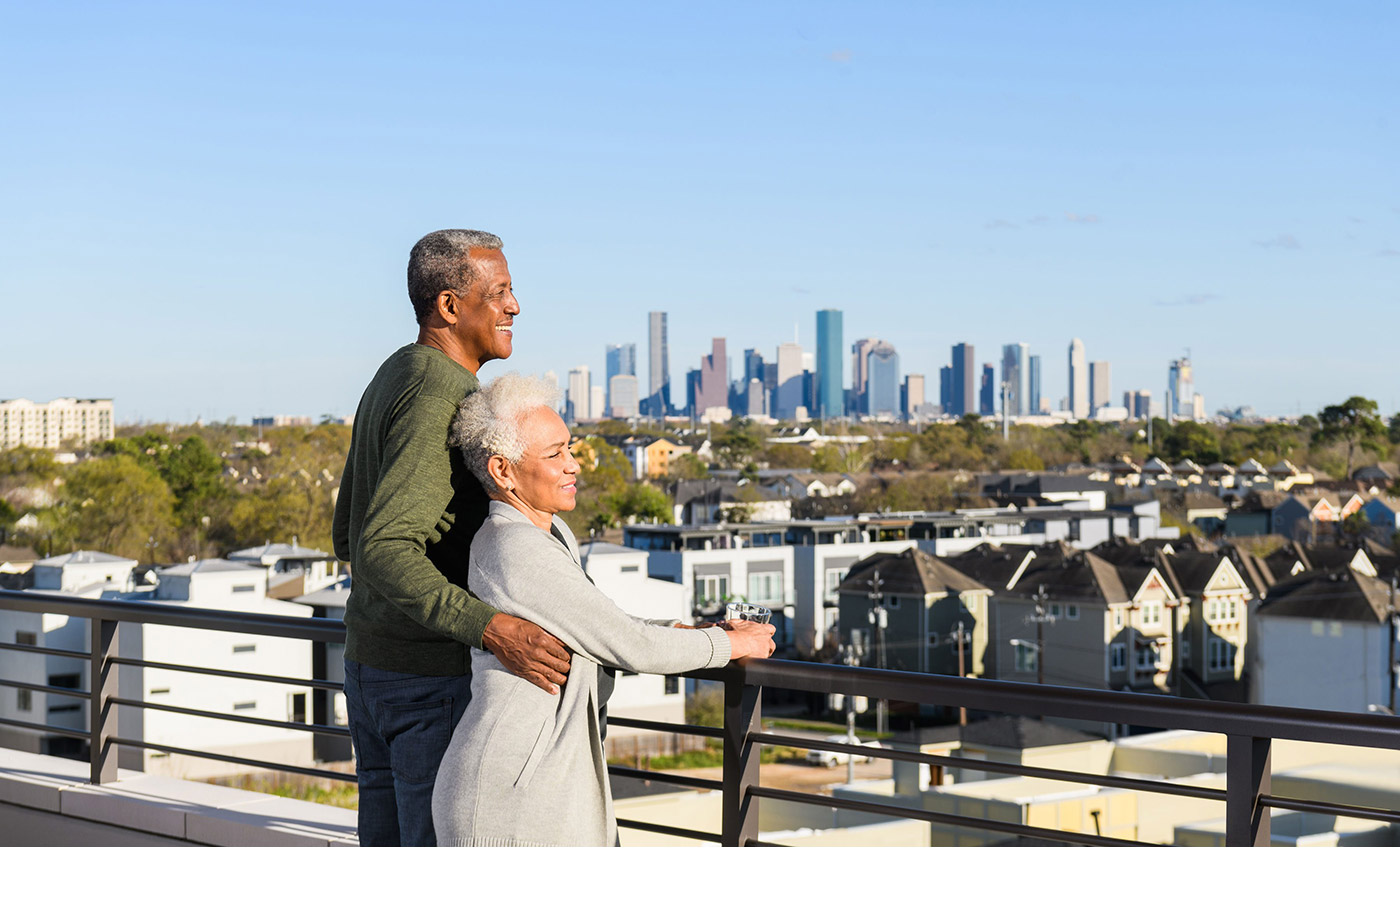 Two residents are on a rooftop deck overlooking the view of the city.